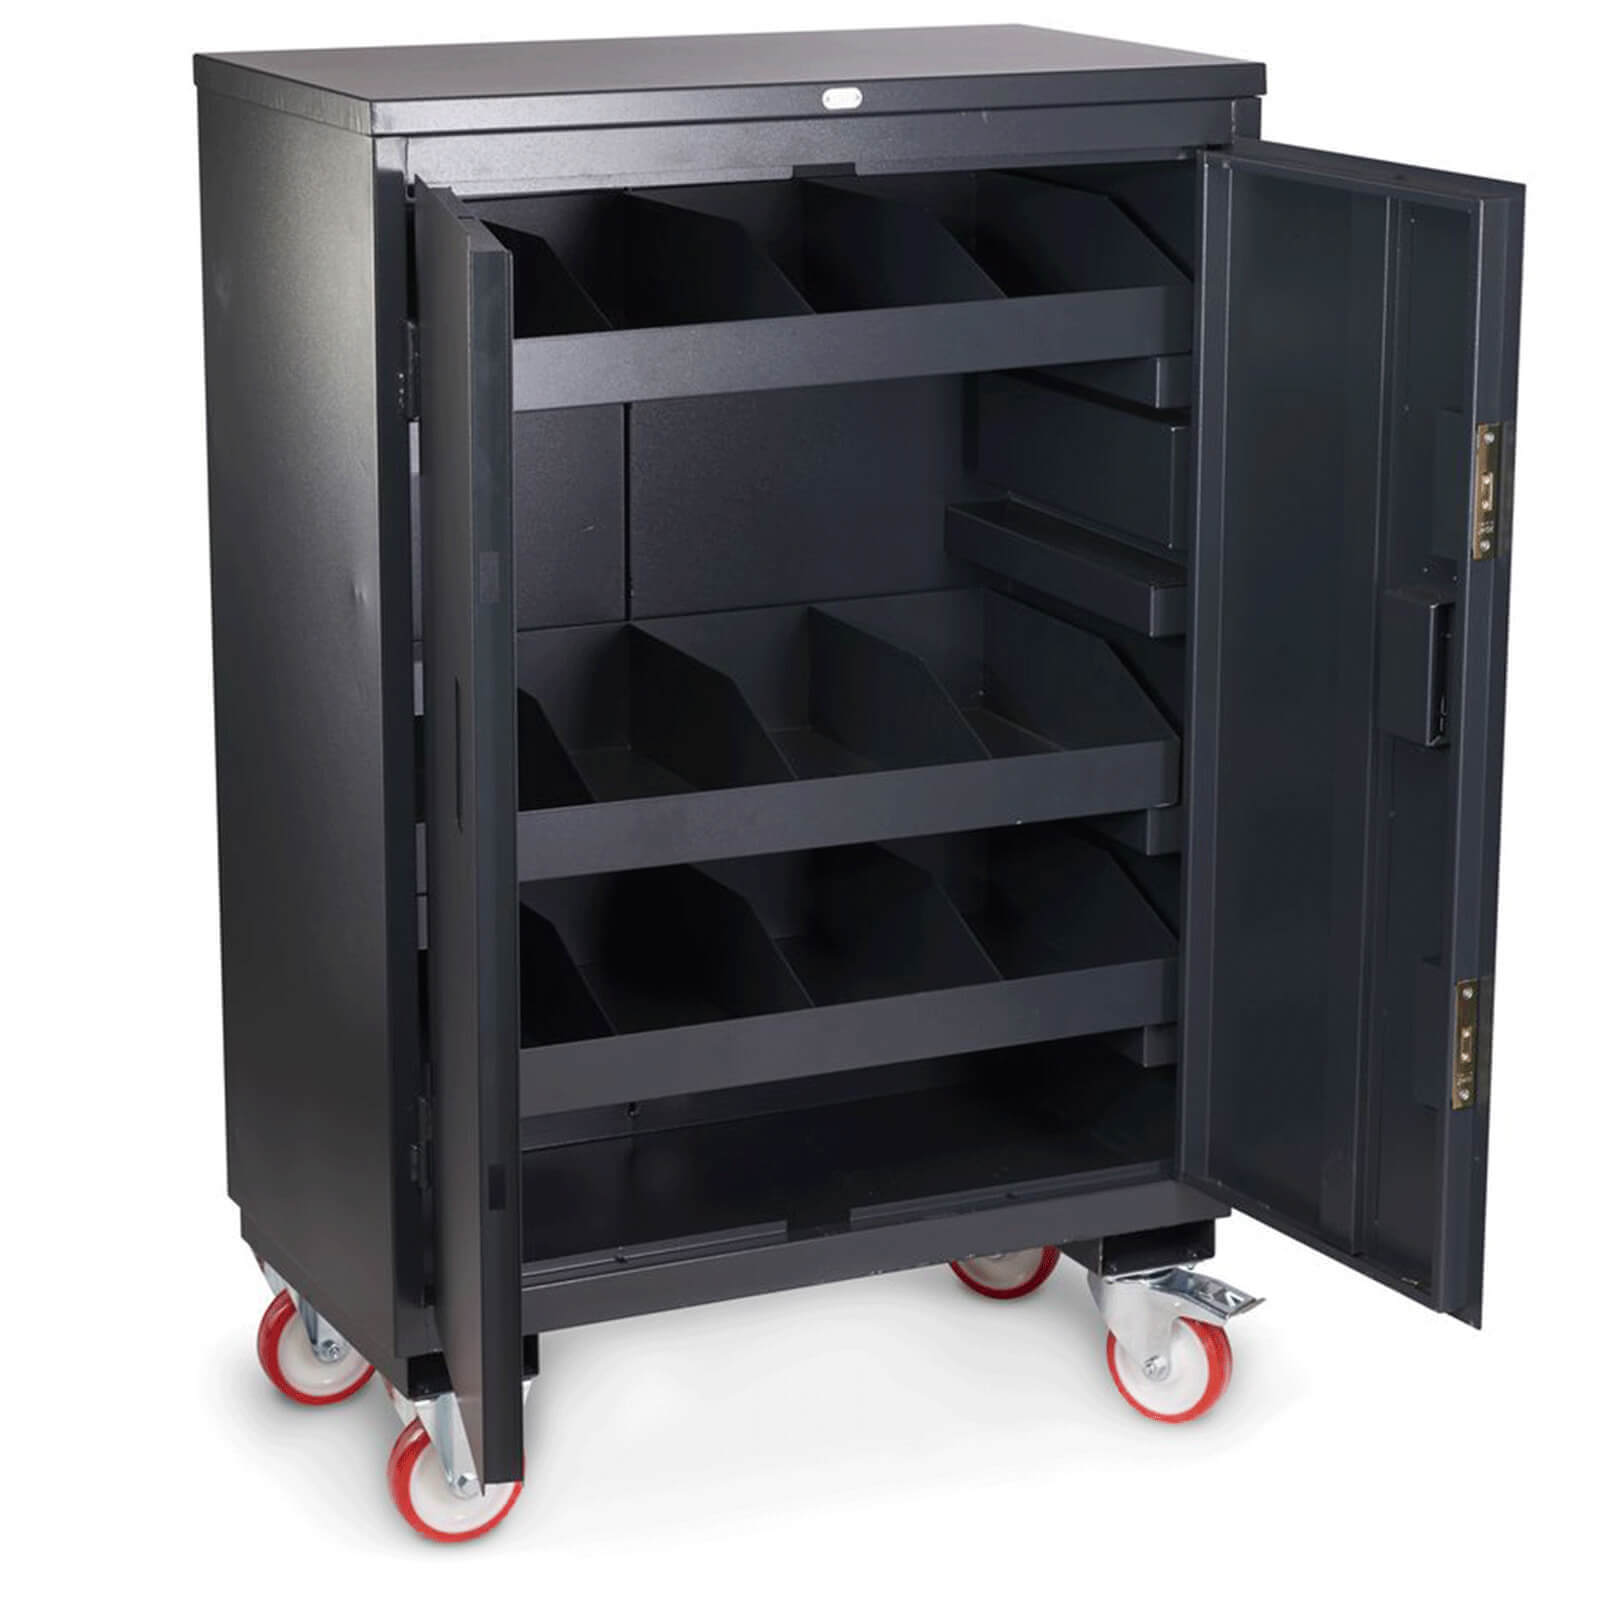 Image of Armorgard Fittingstor Mobile Secure Fittings and Fixings Cabinet 1010mm 550mm 1575mm